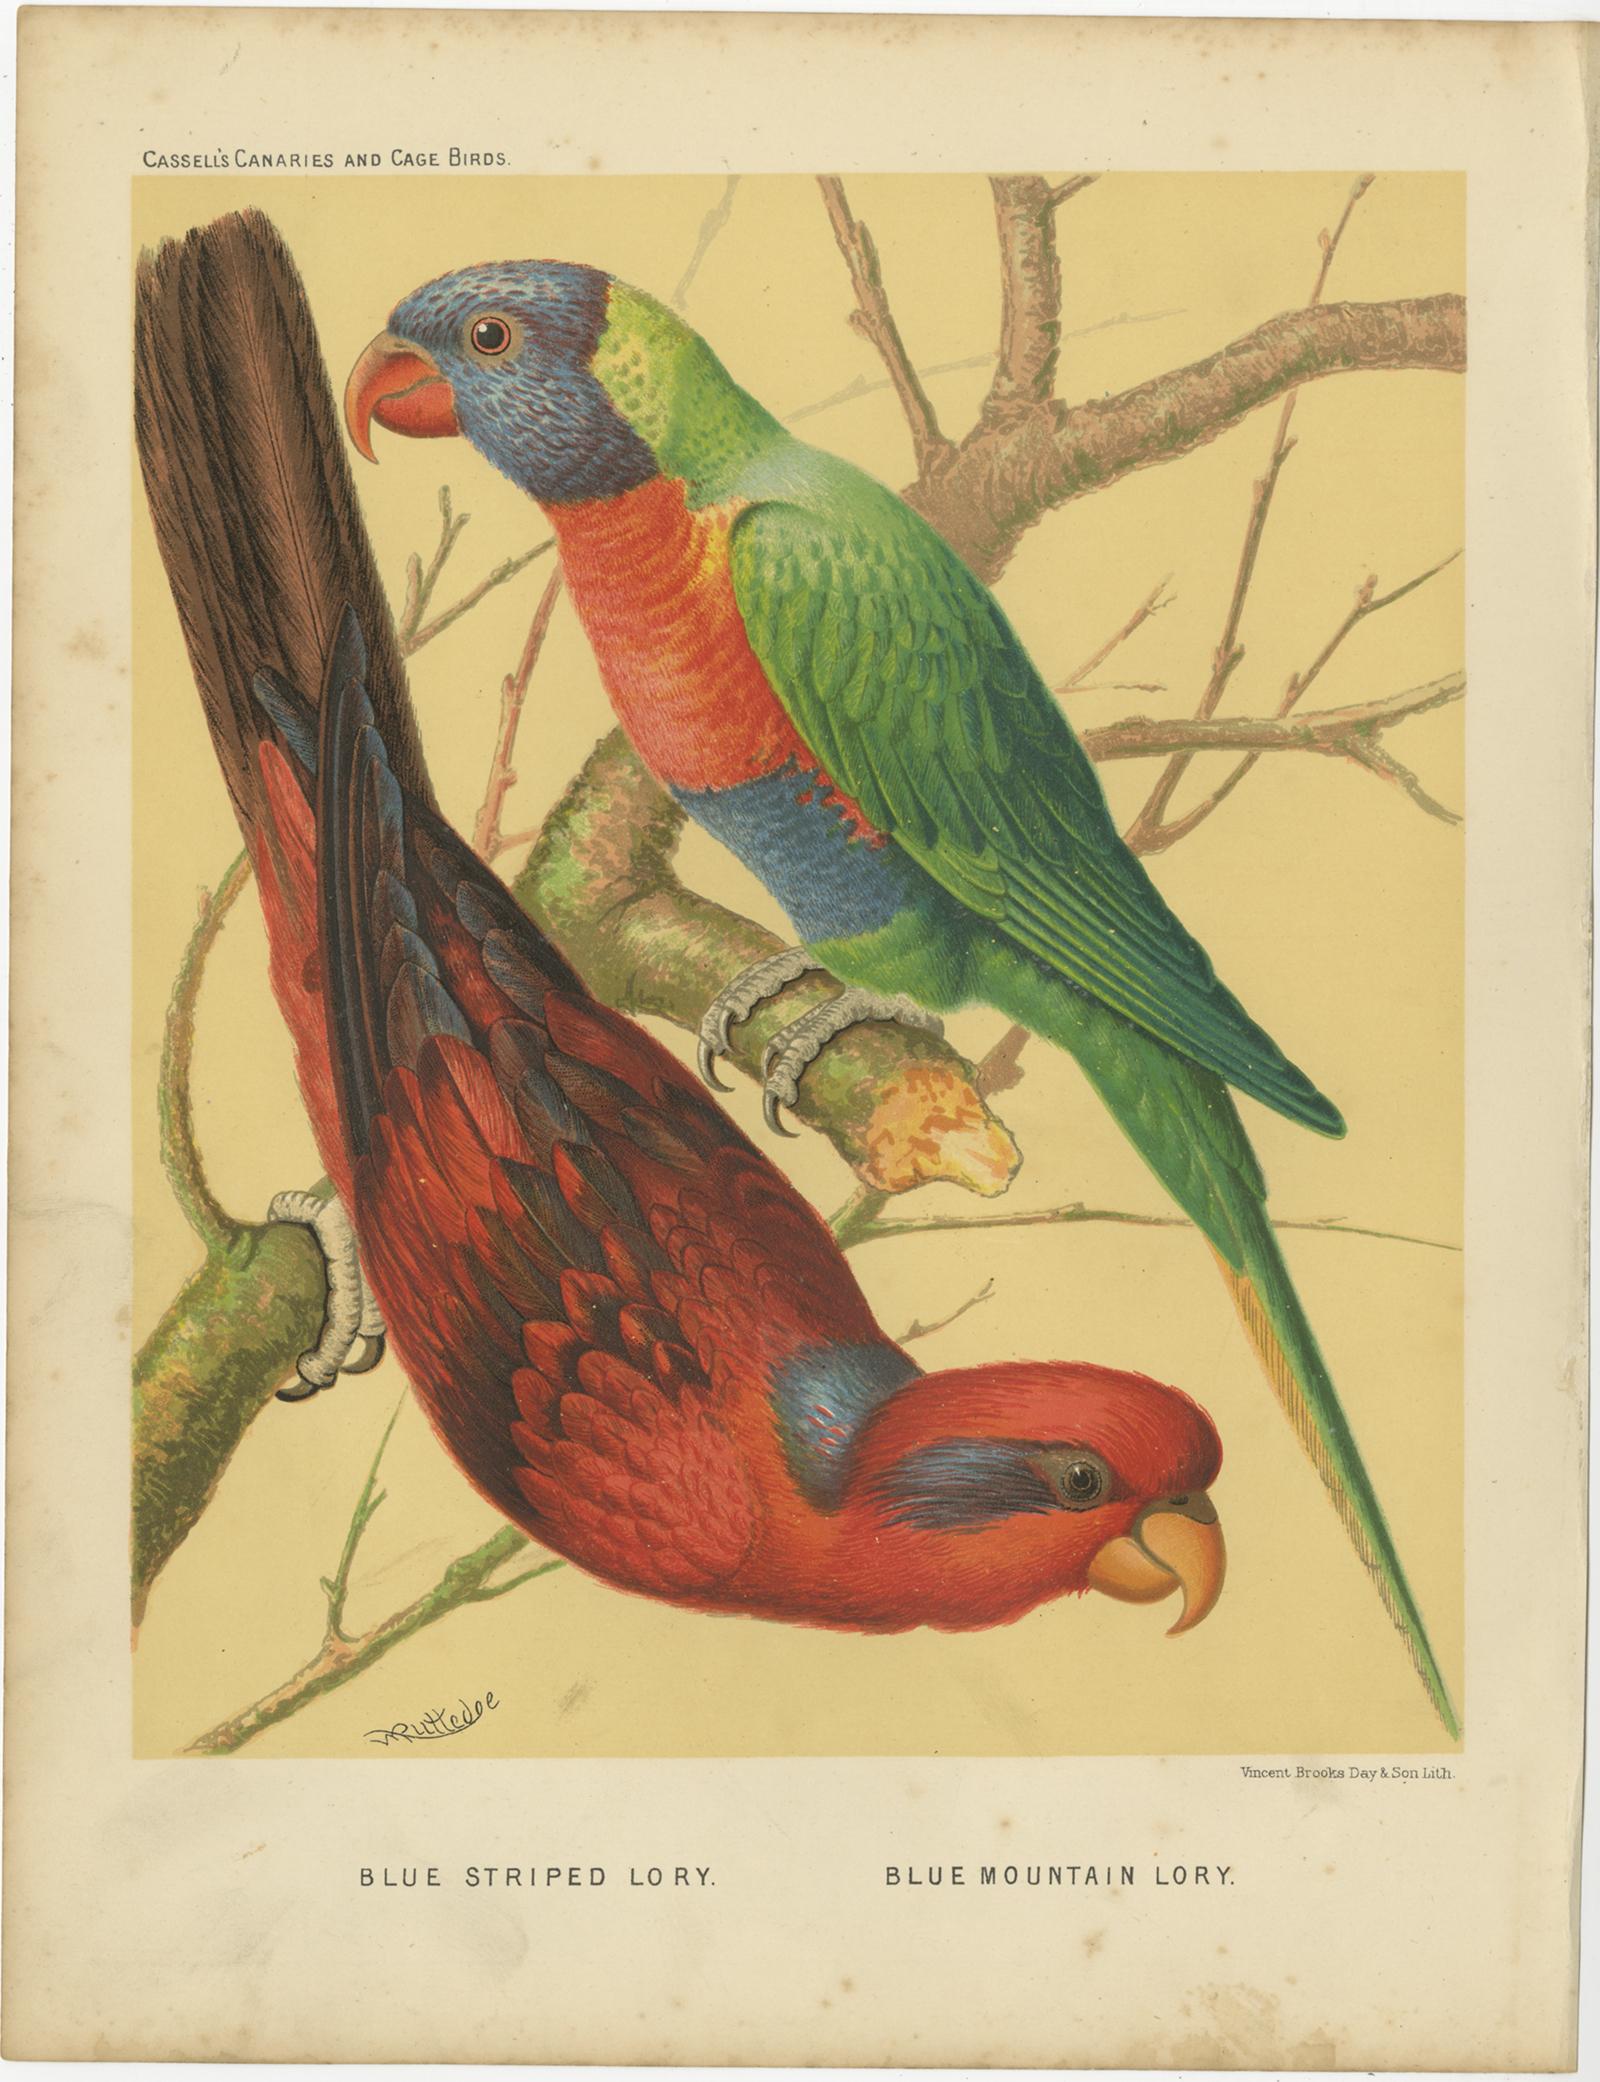 Antique bird print titled '1. Blue Striped Lory. 2. Blue Mountain Lory.' Old bird print depicting the Blue-streaked lory and Blue Mountain Lory. This print originates from: 'Illustrated book of canaries and cage-birds' by W. A. Blackston, W.